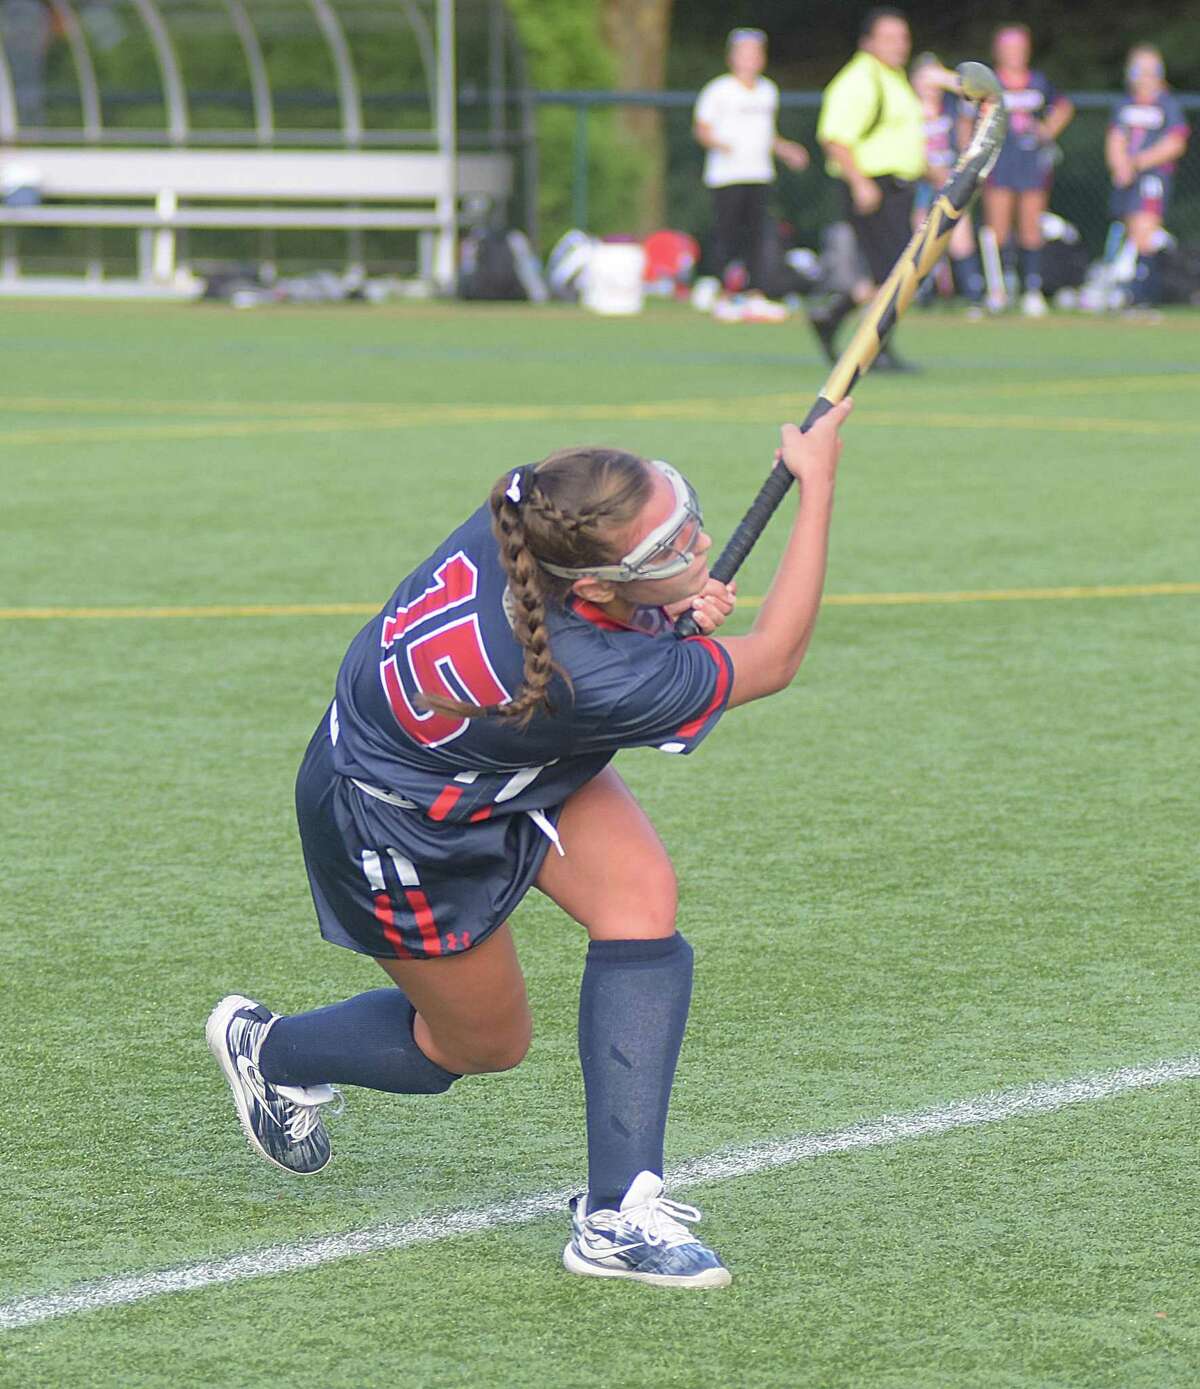 Greens Farms Academy field hockey player Lucy Holzinger rips off a drive during last week?’s game against Rye Country Day in Westport. The Dragons are off to a 4-1 start this season.